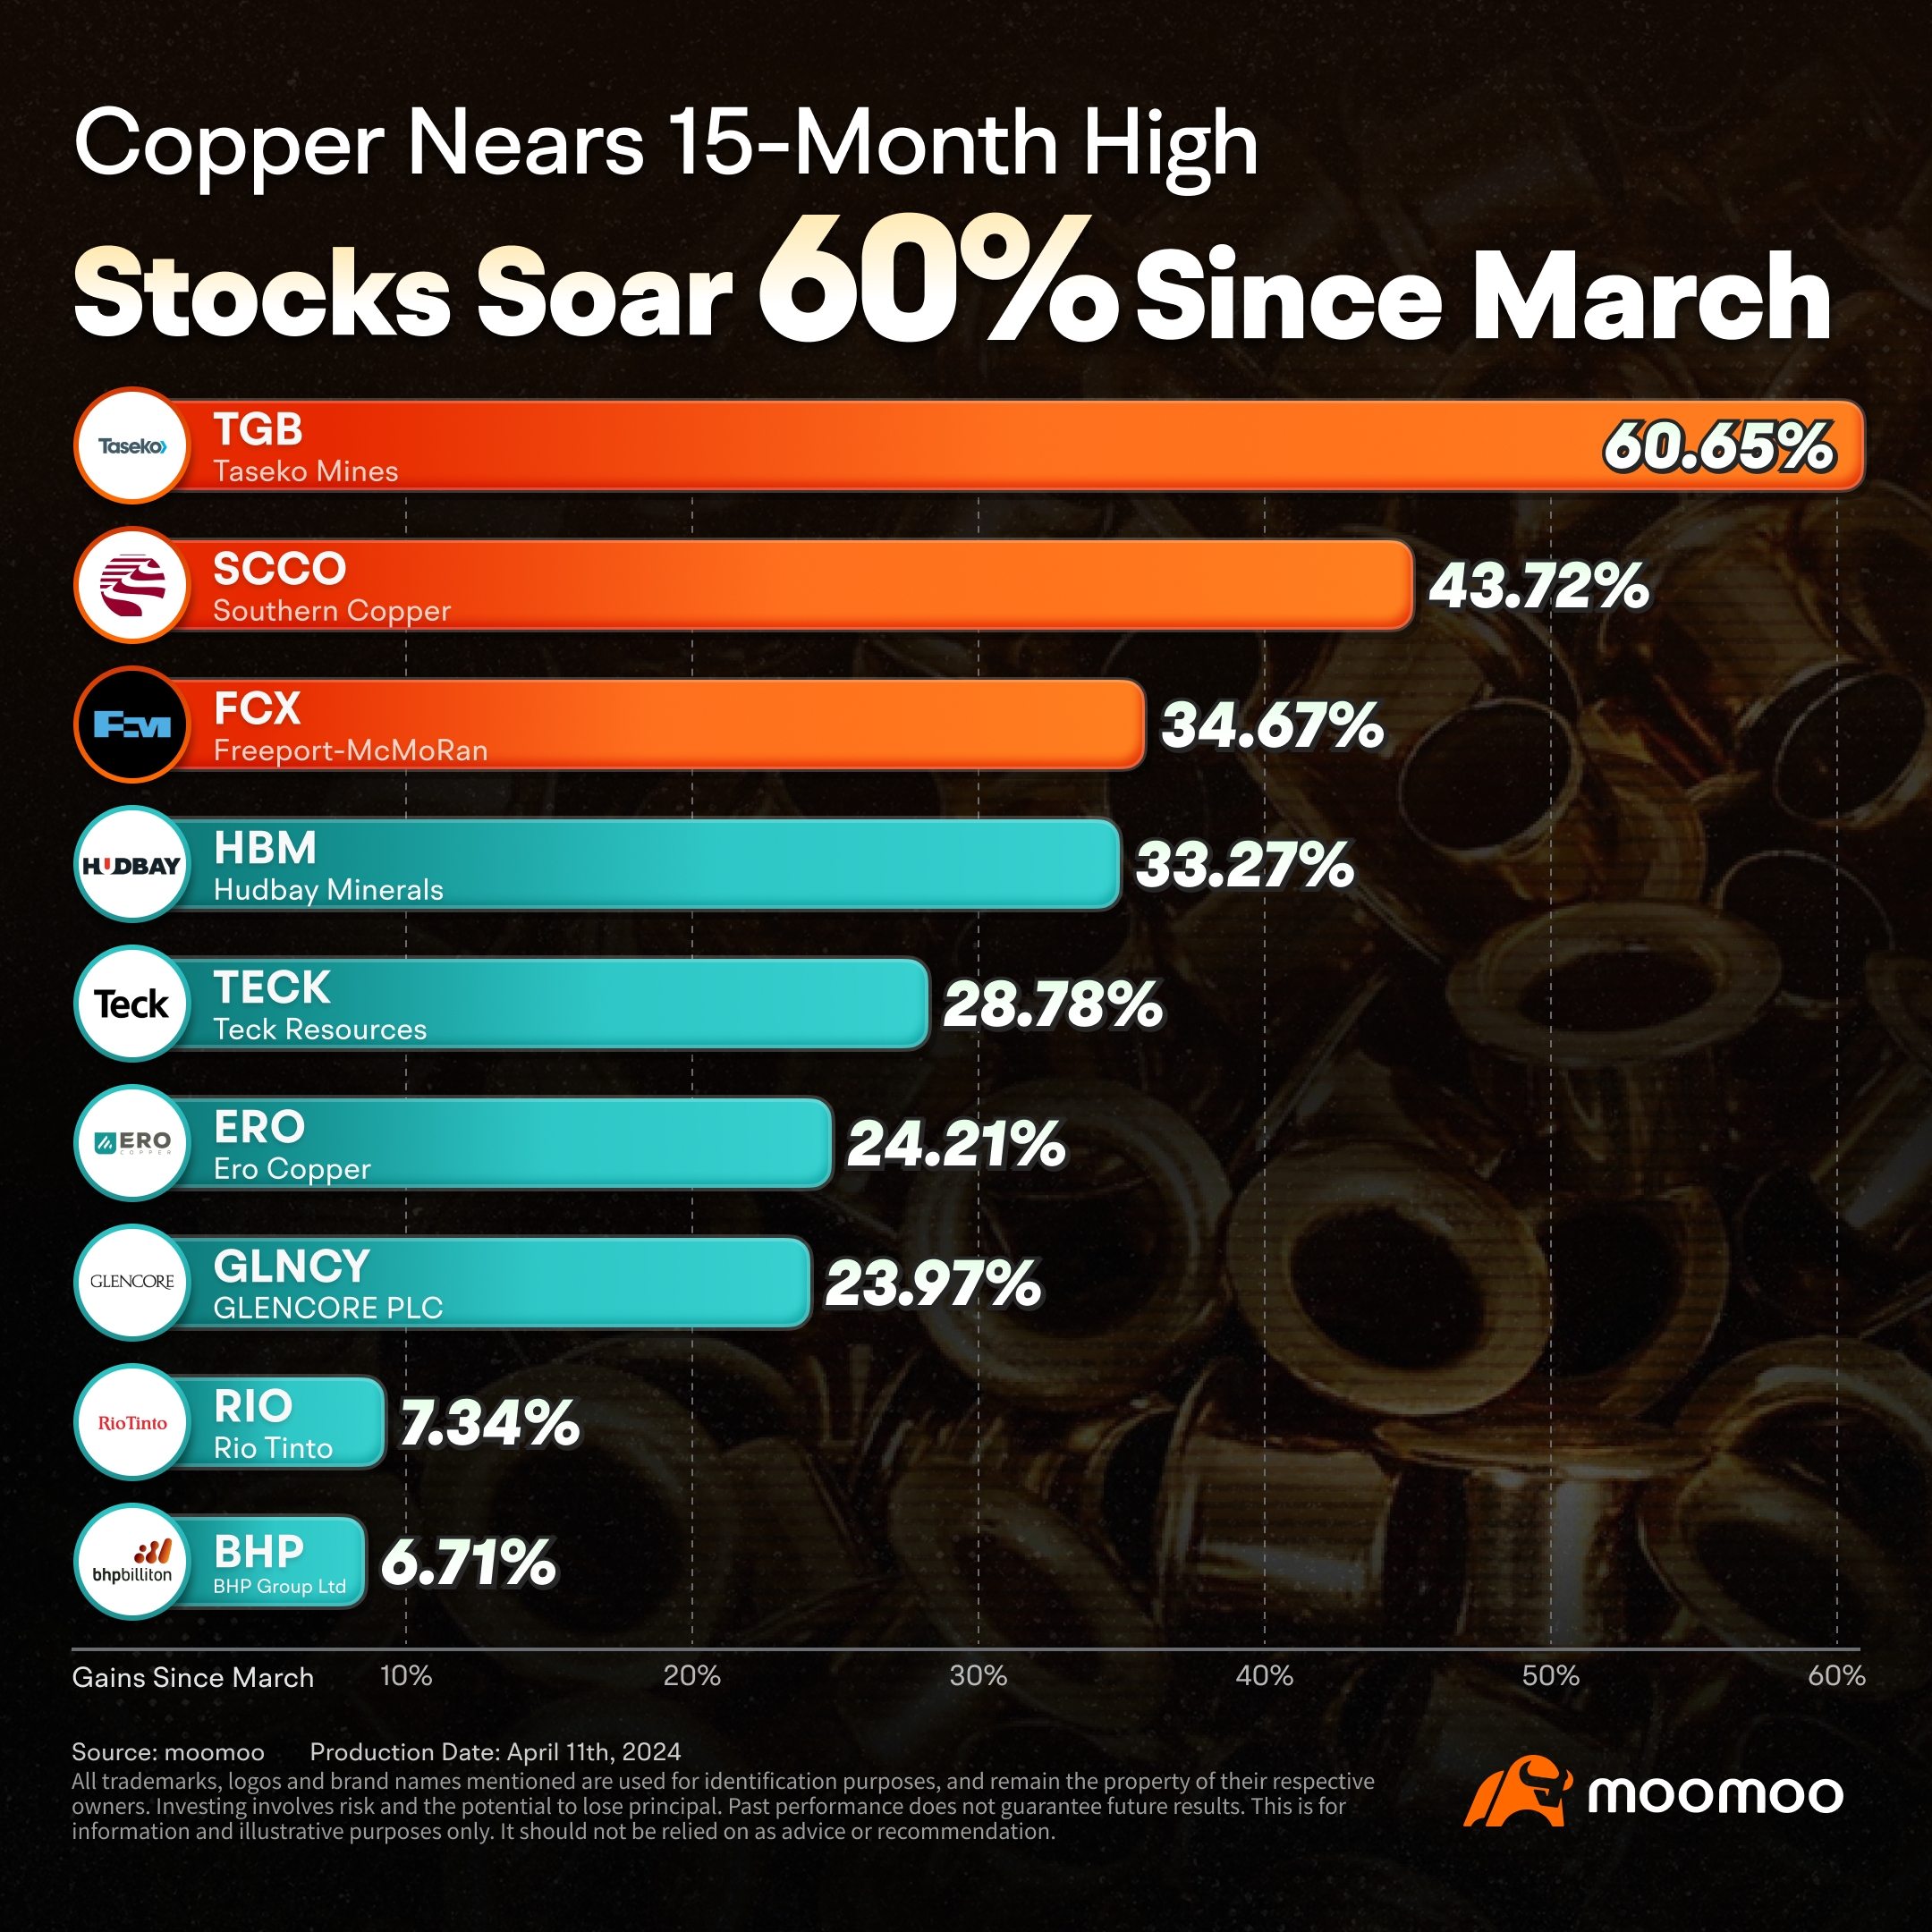 Copper Nears 15-Month High: Check Out Why These Copper Stocks Are Skyrocketing